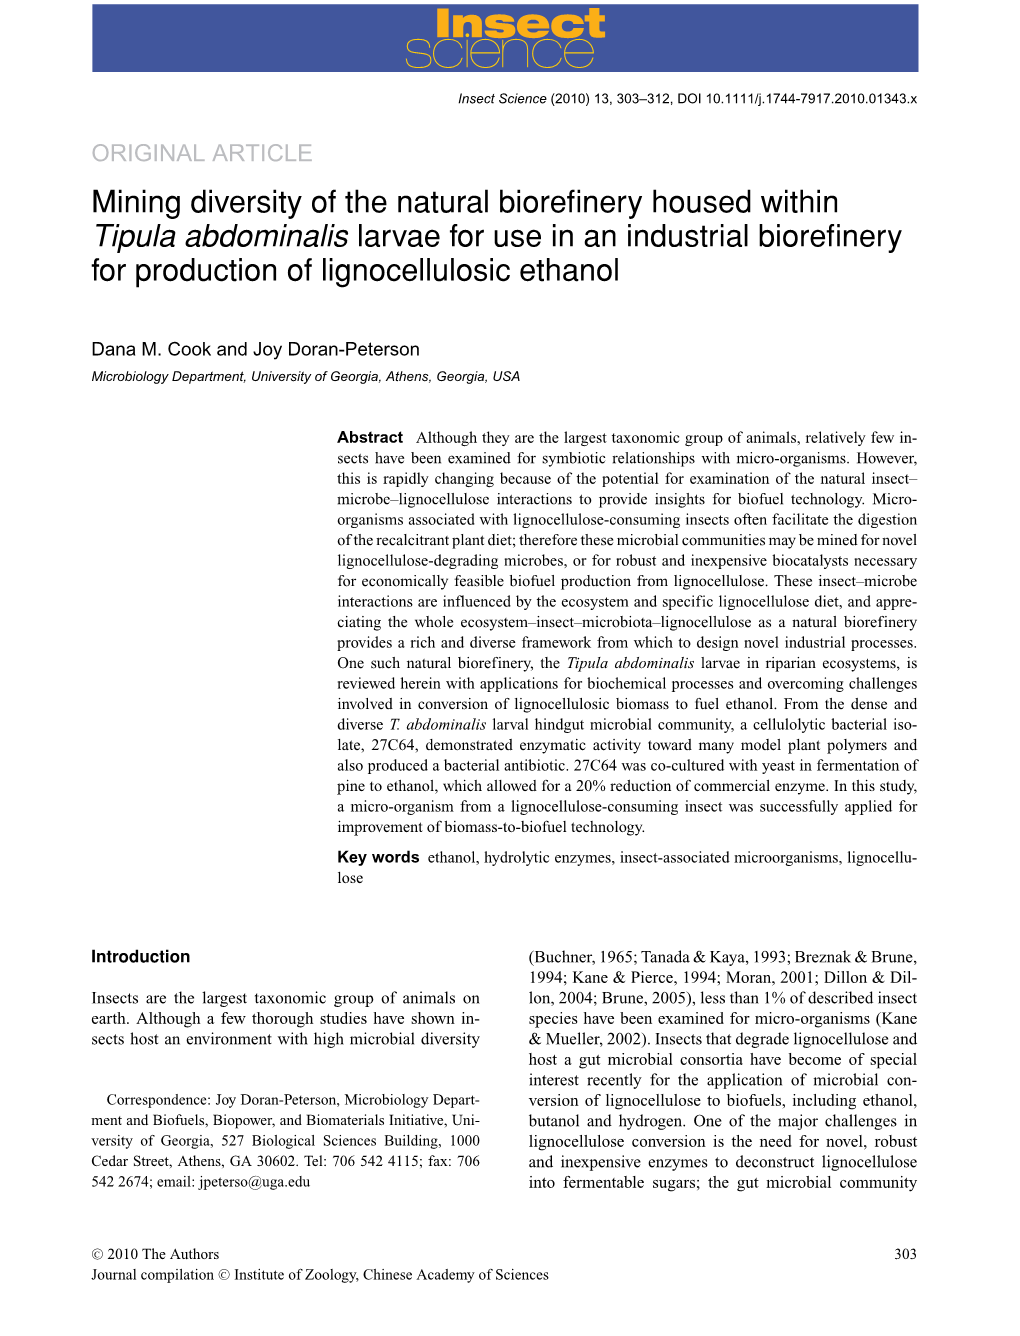 Mining Diversity of the Natural Biorefinery Housed Within Tipula Abdominalis Larvae for Use in an Industrial Biorefinery For